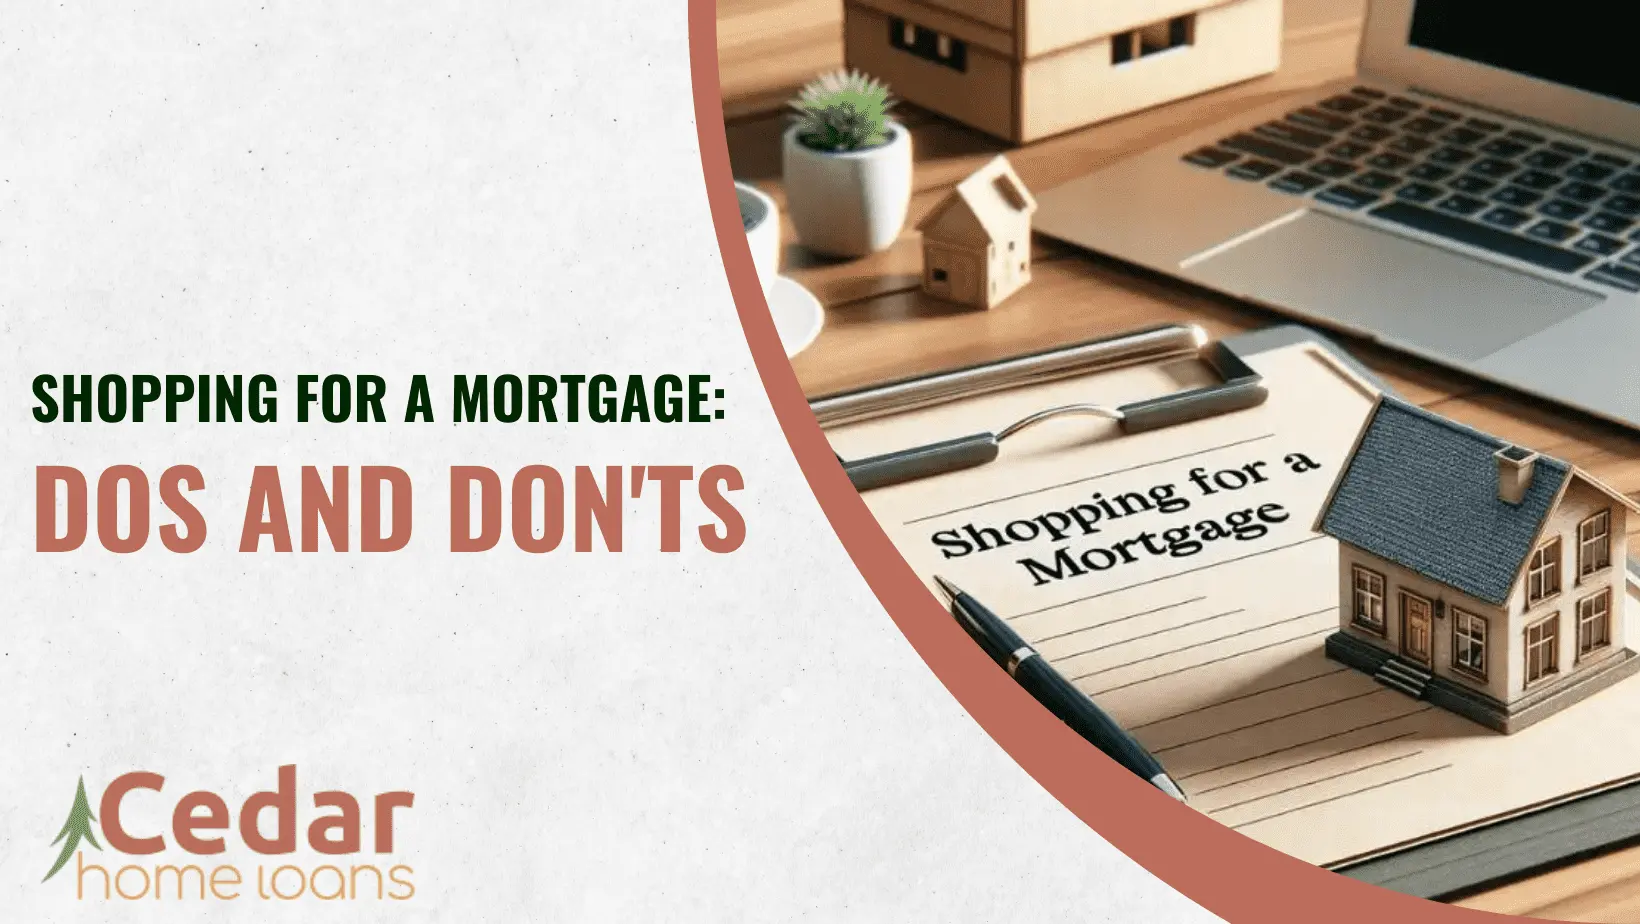 Shopping for a Mortgage Dos and Don'ts